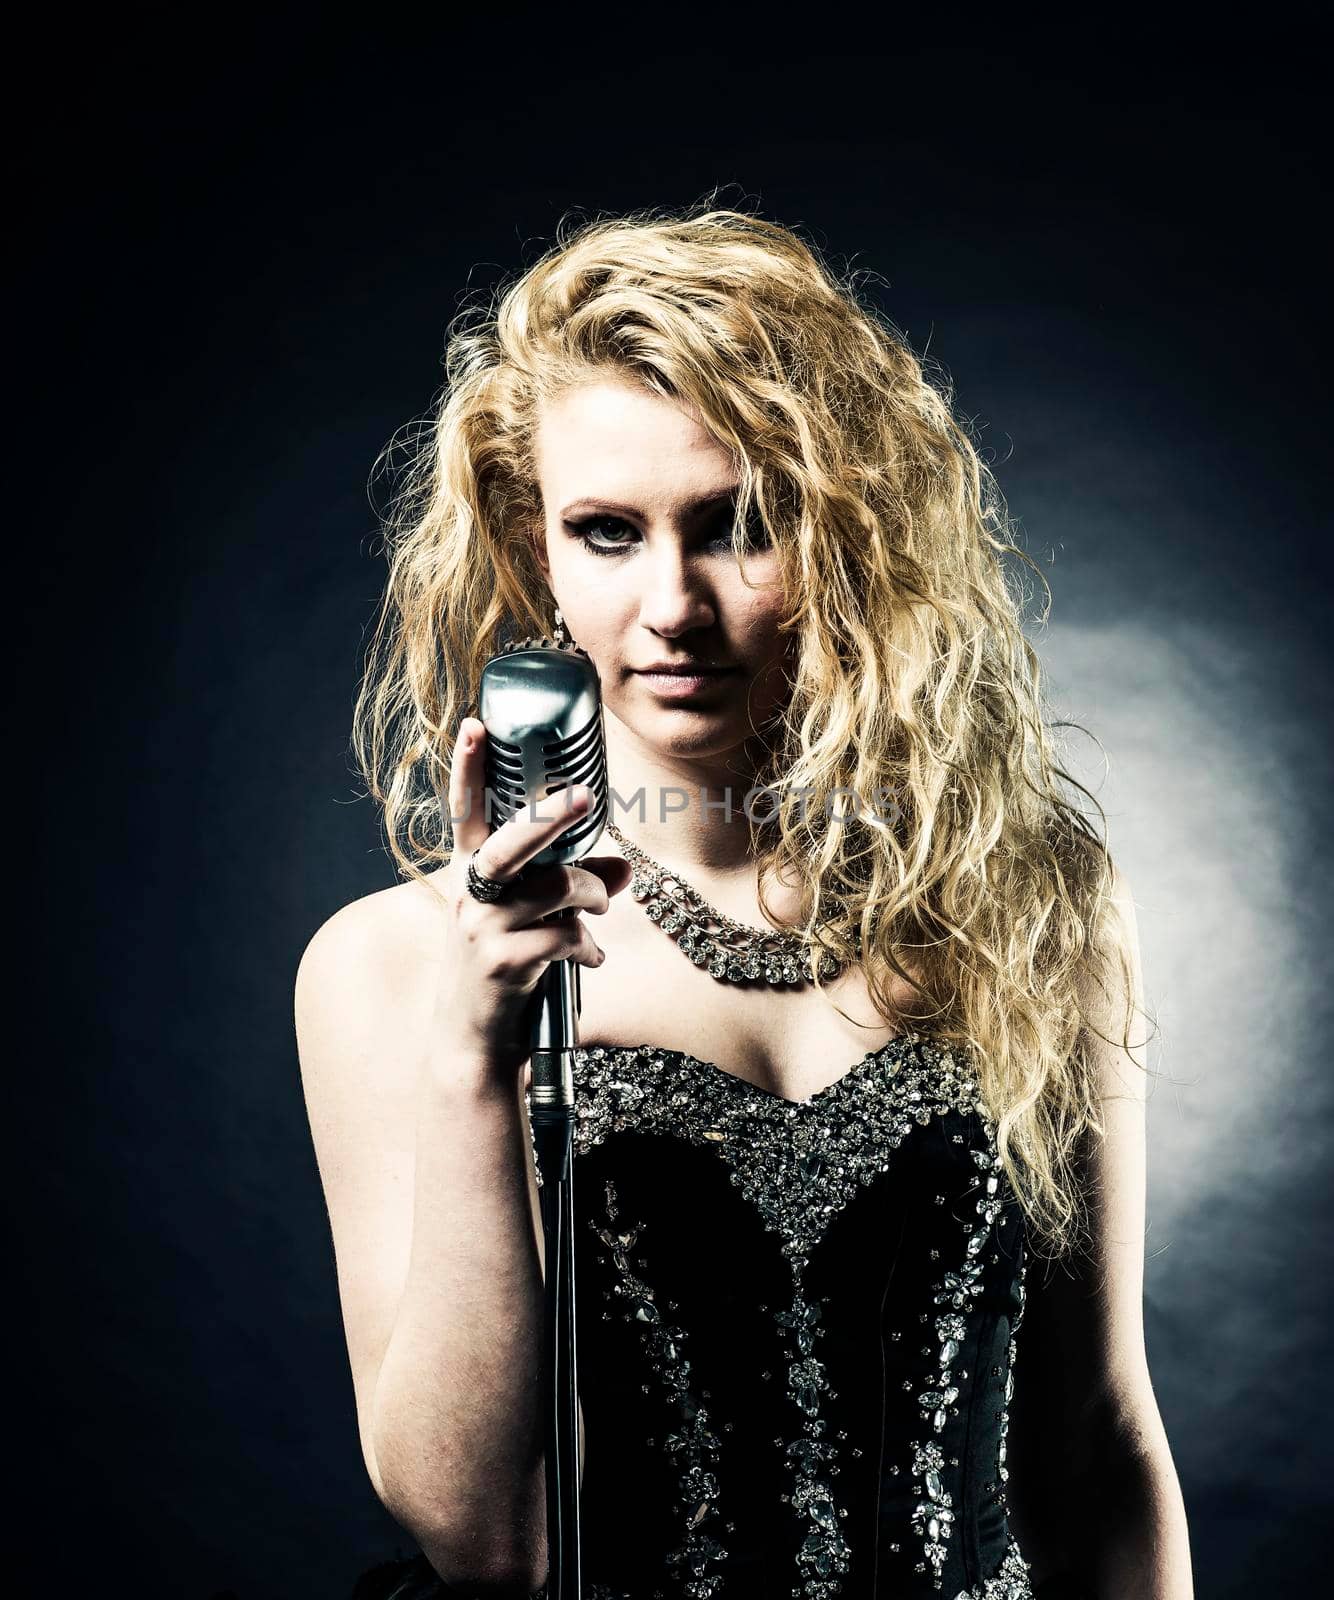 beautiful blonde woman singer in a black dress holding a microphone and sings a song.photo on dark background